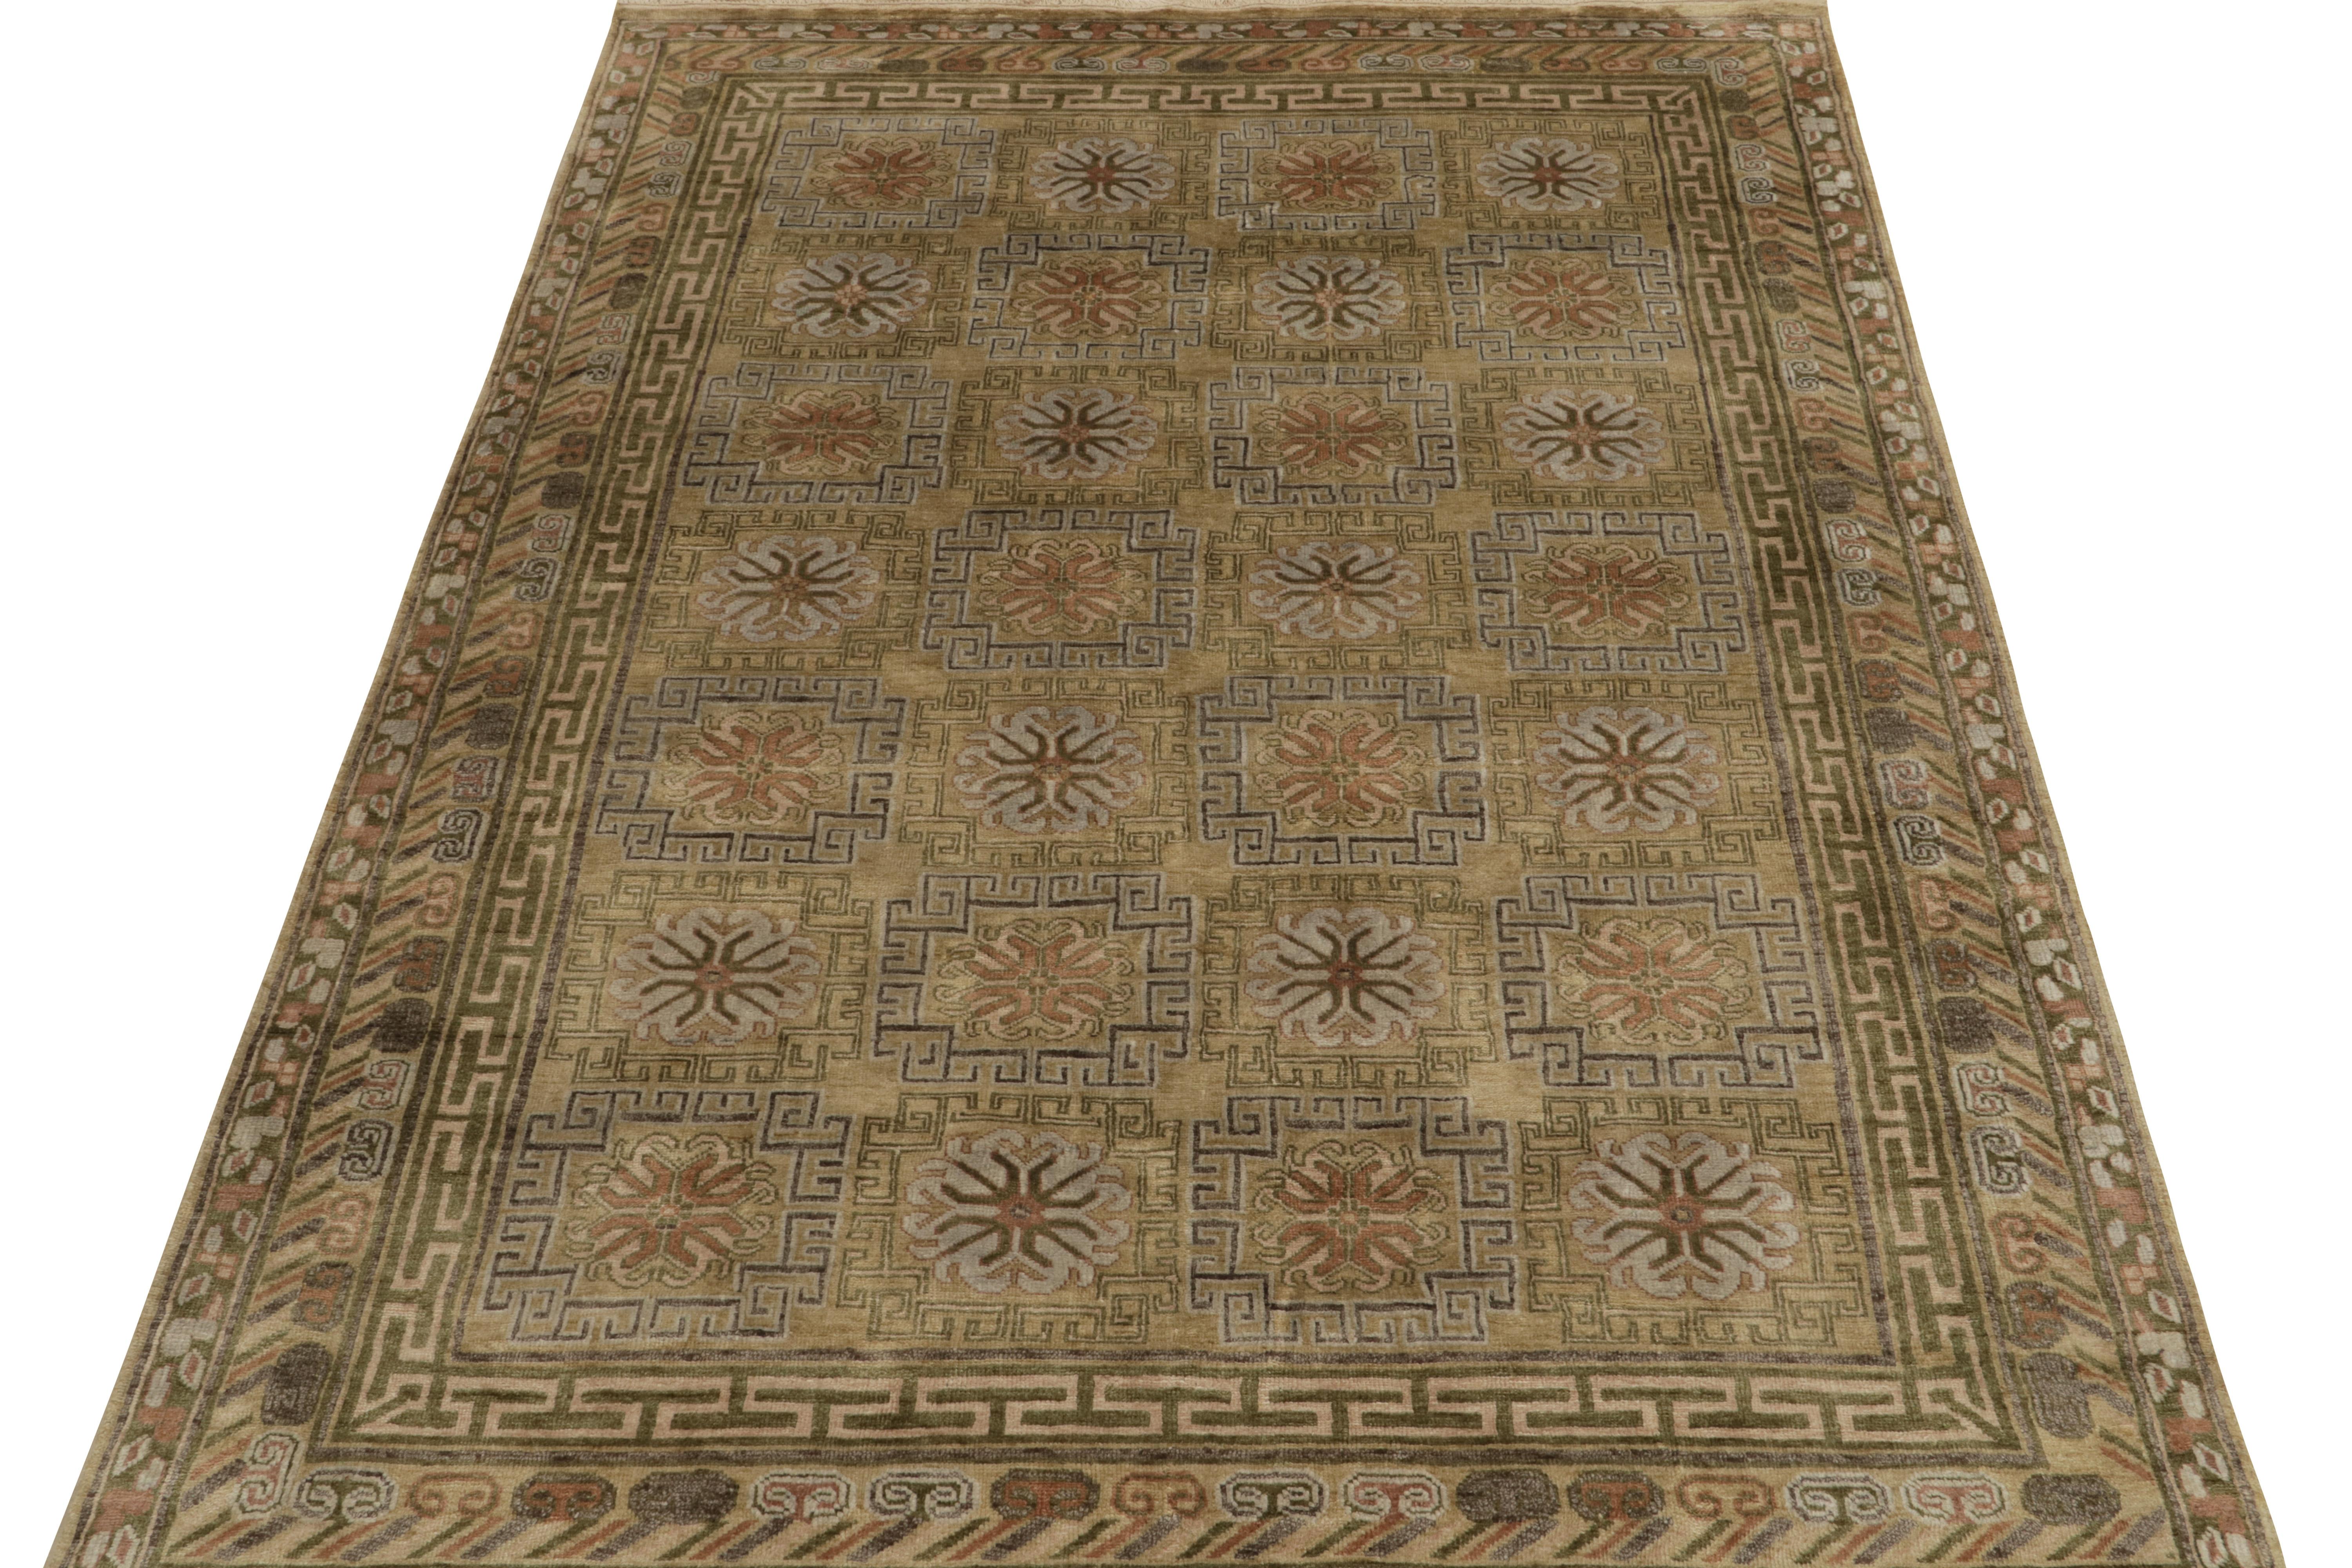 Indian Rug & Kilim’s Khotan style rug in Gold and Beige-Brown Geometric Patterns For Sale